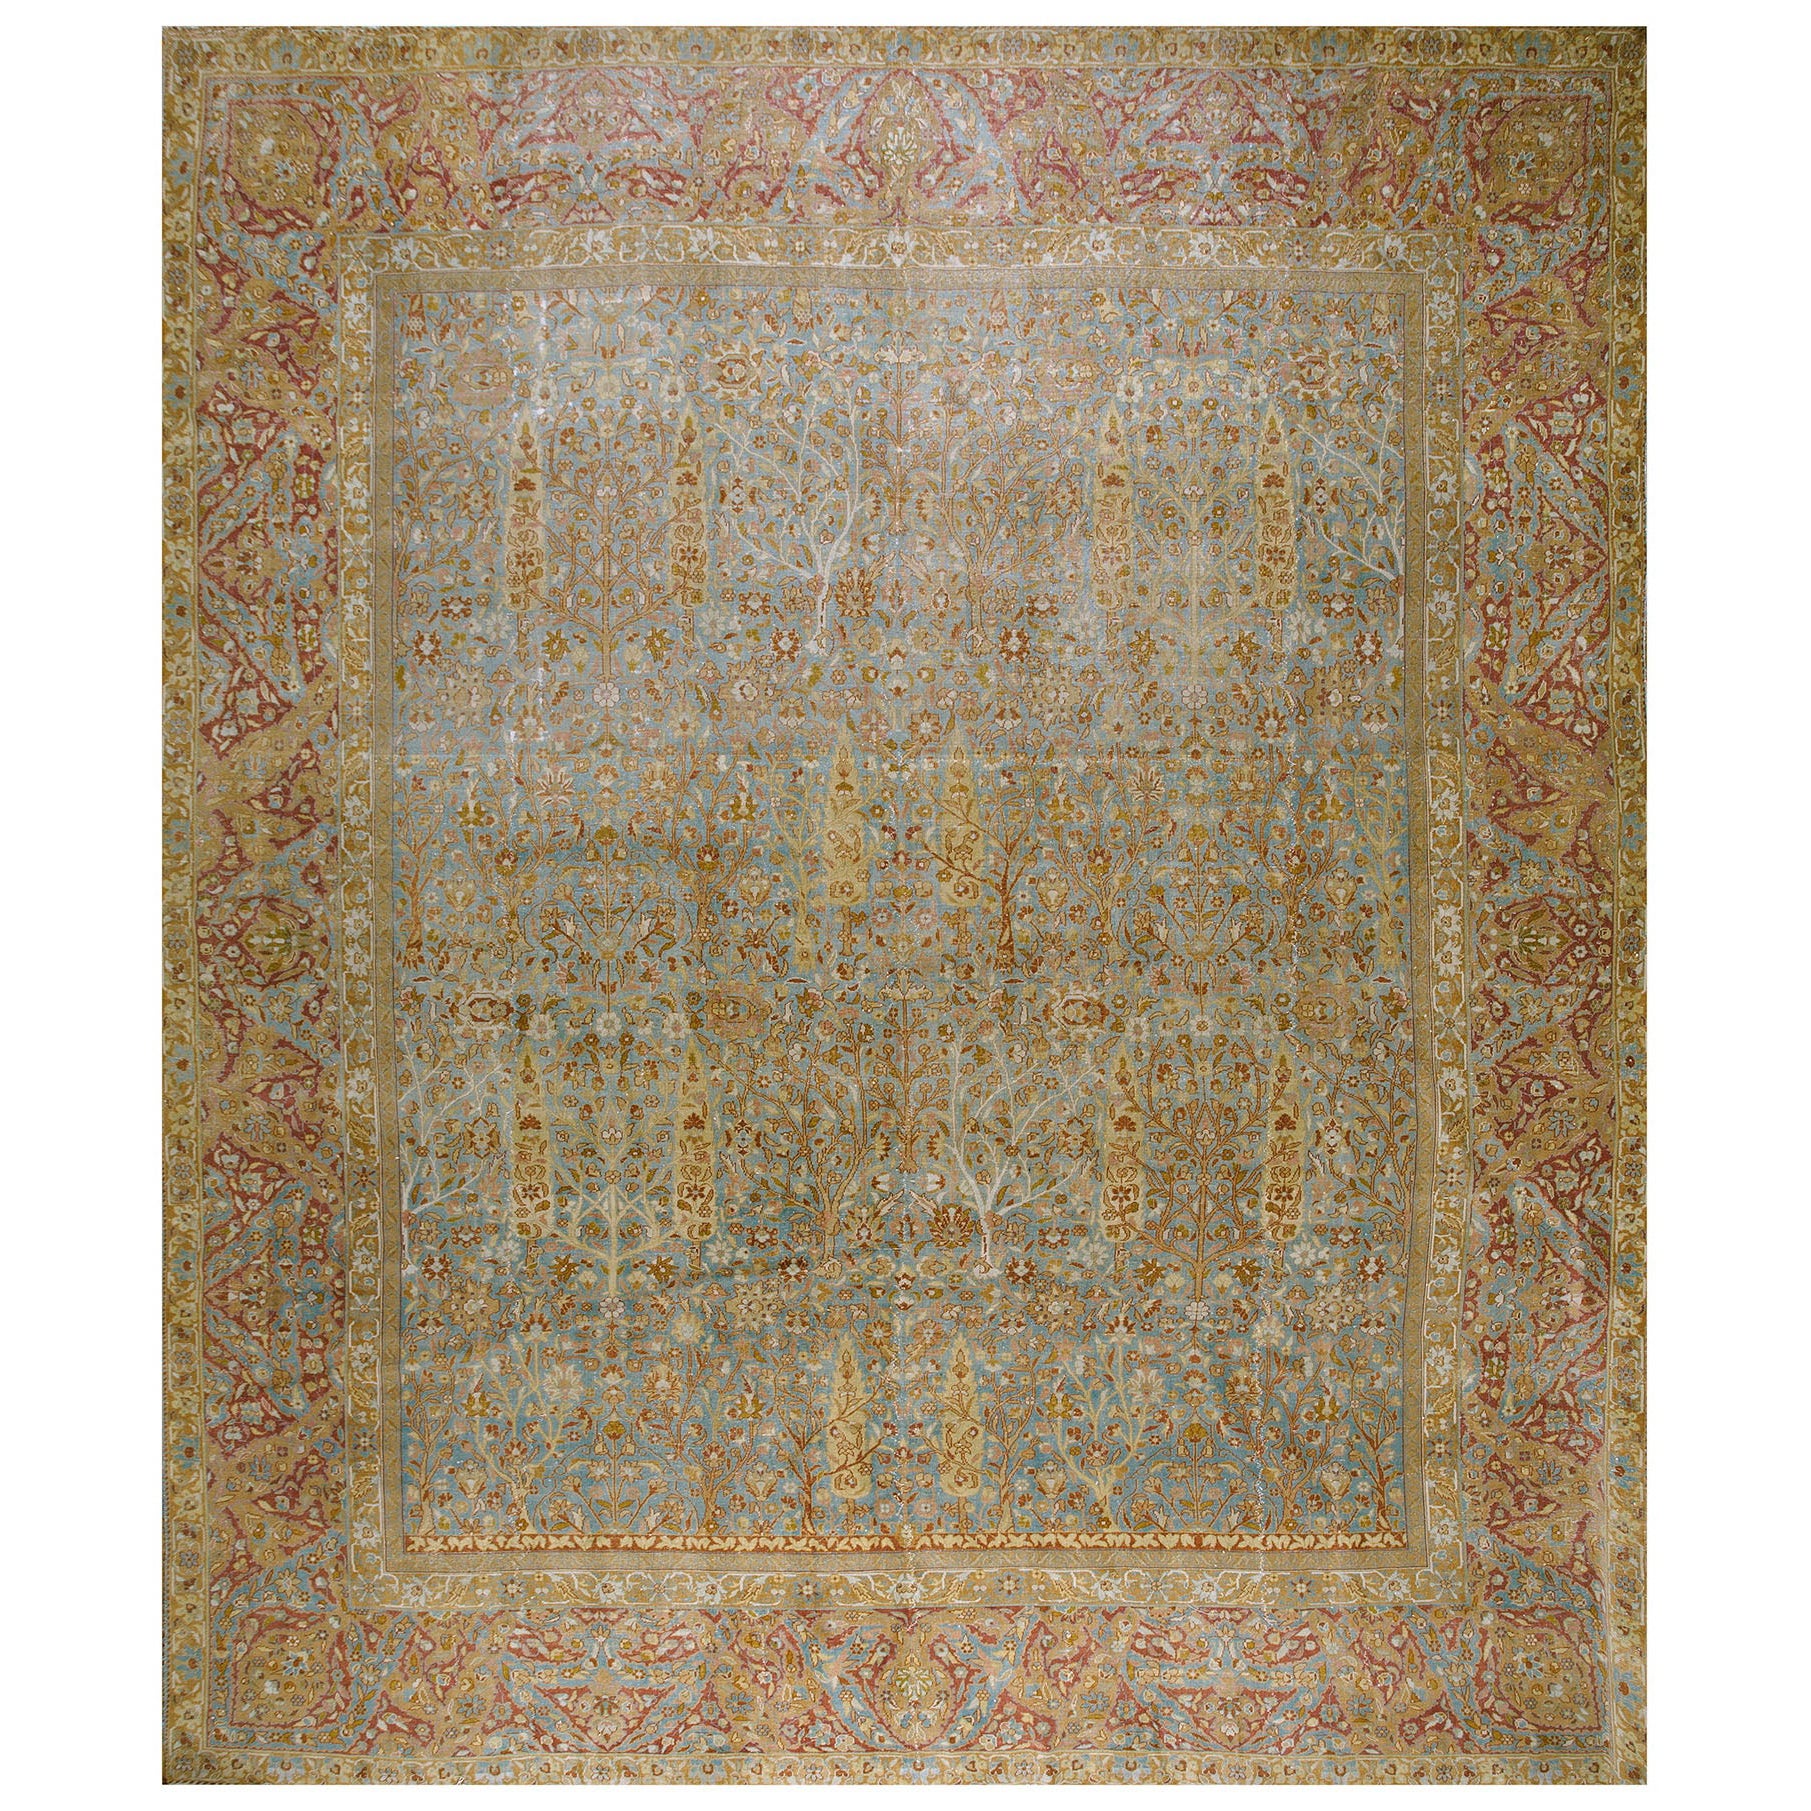 Early 20th Century Indian Lahore Carpet ( 15' x 17' - 457 x 518 cm ) For Sale